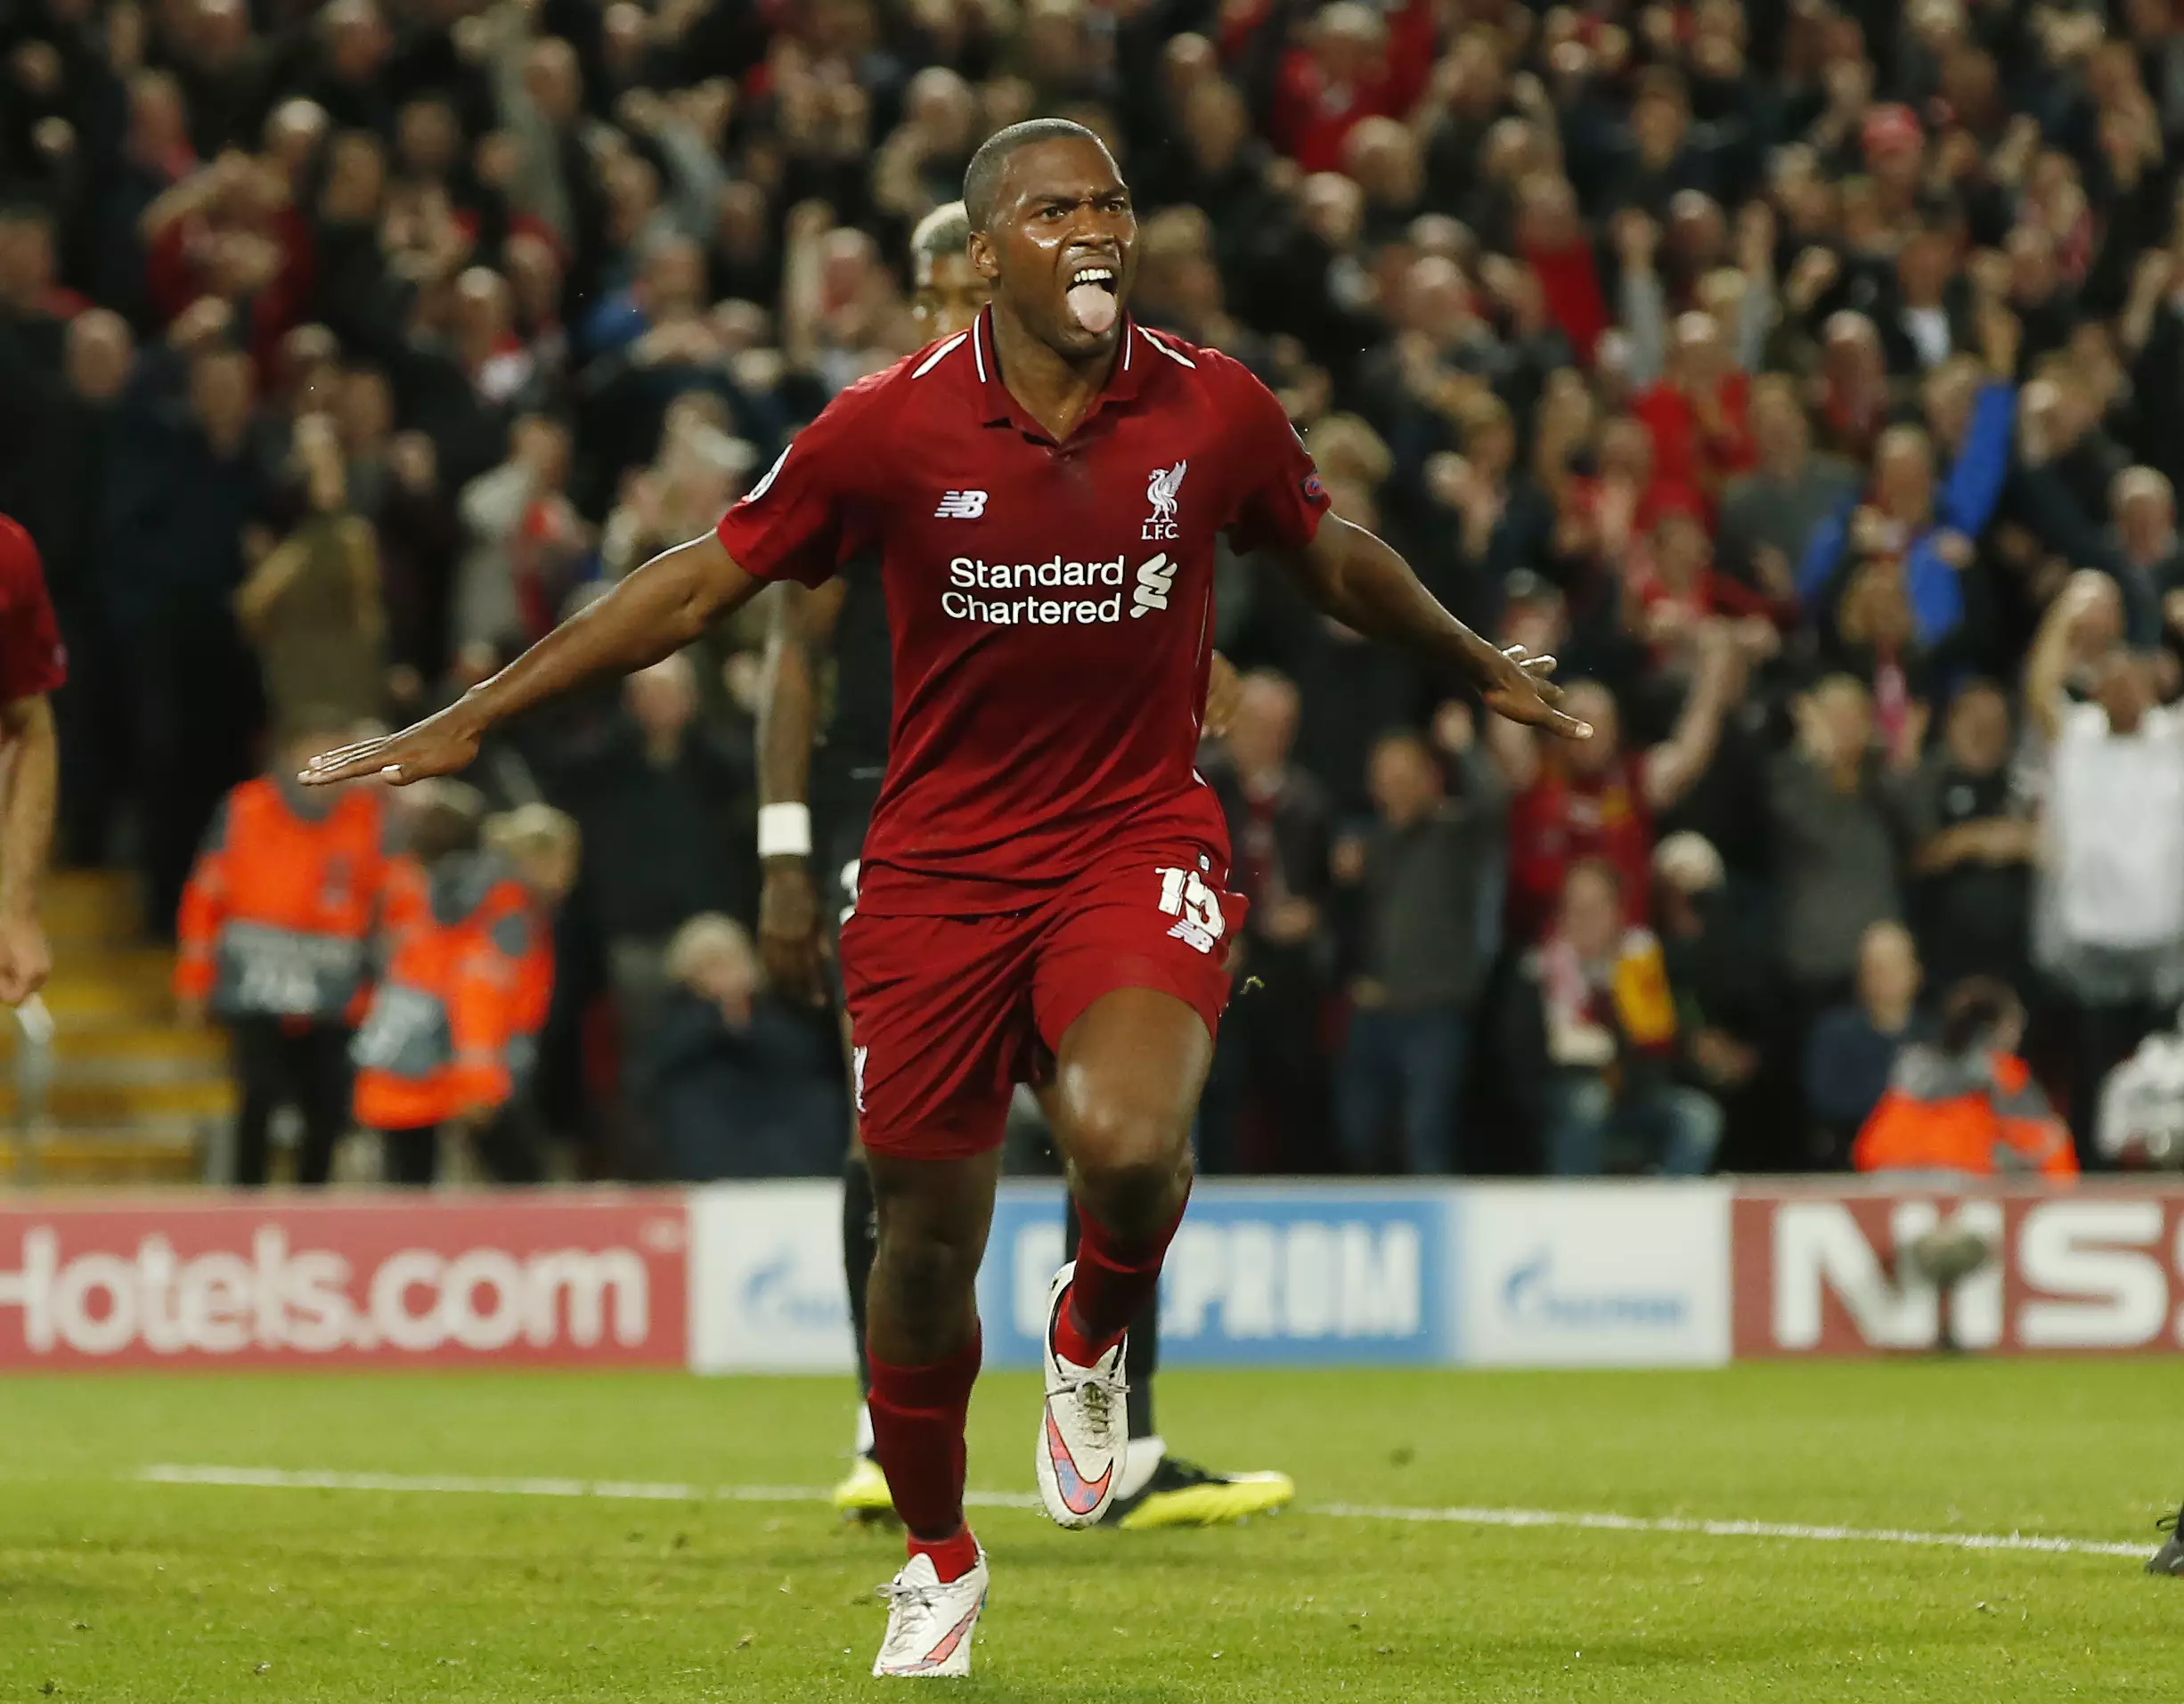 Sturridge is back at Liverpool this season and has scored twice in seven appearances. Image: PA Images